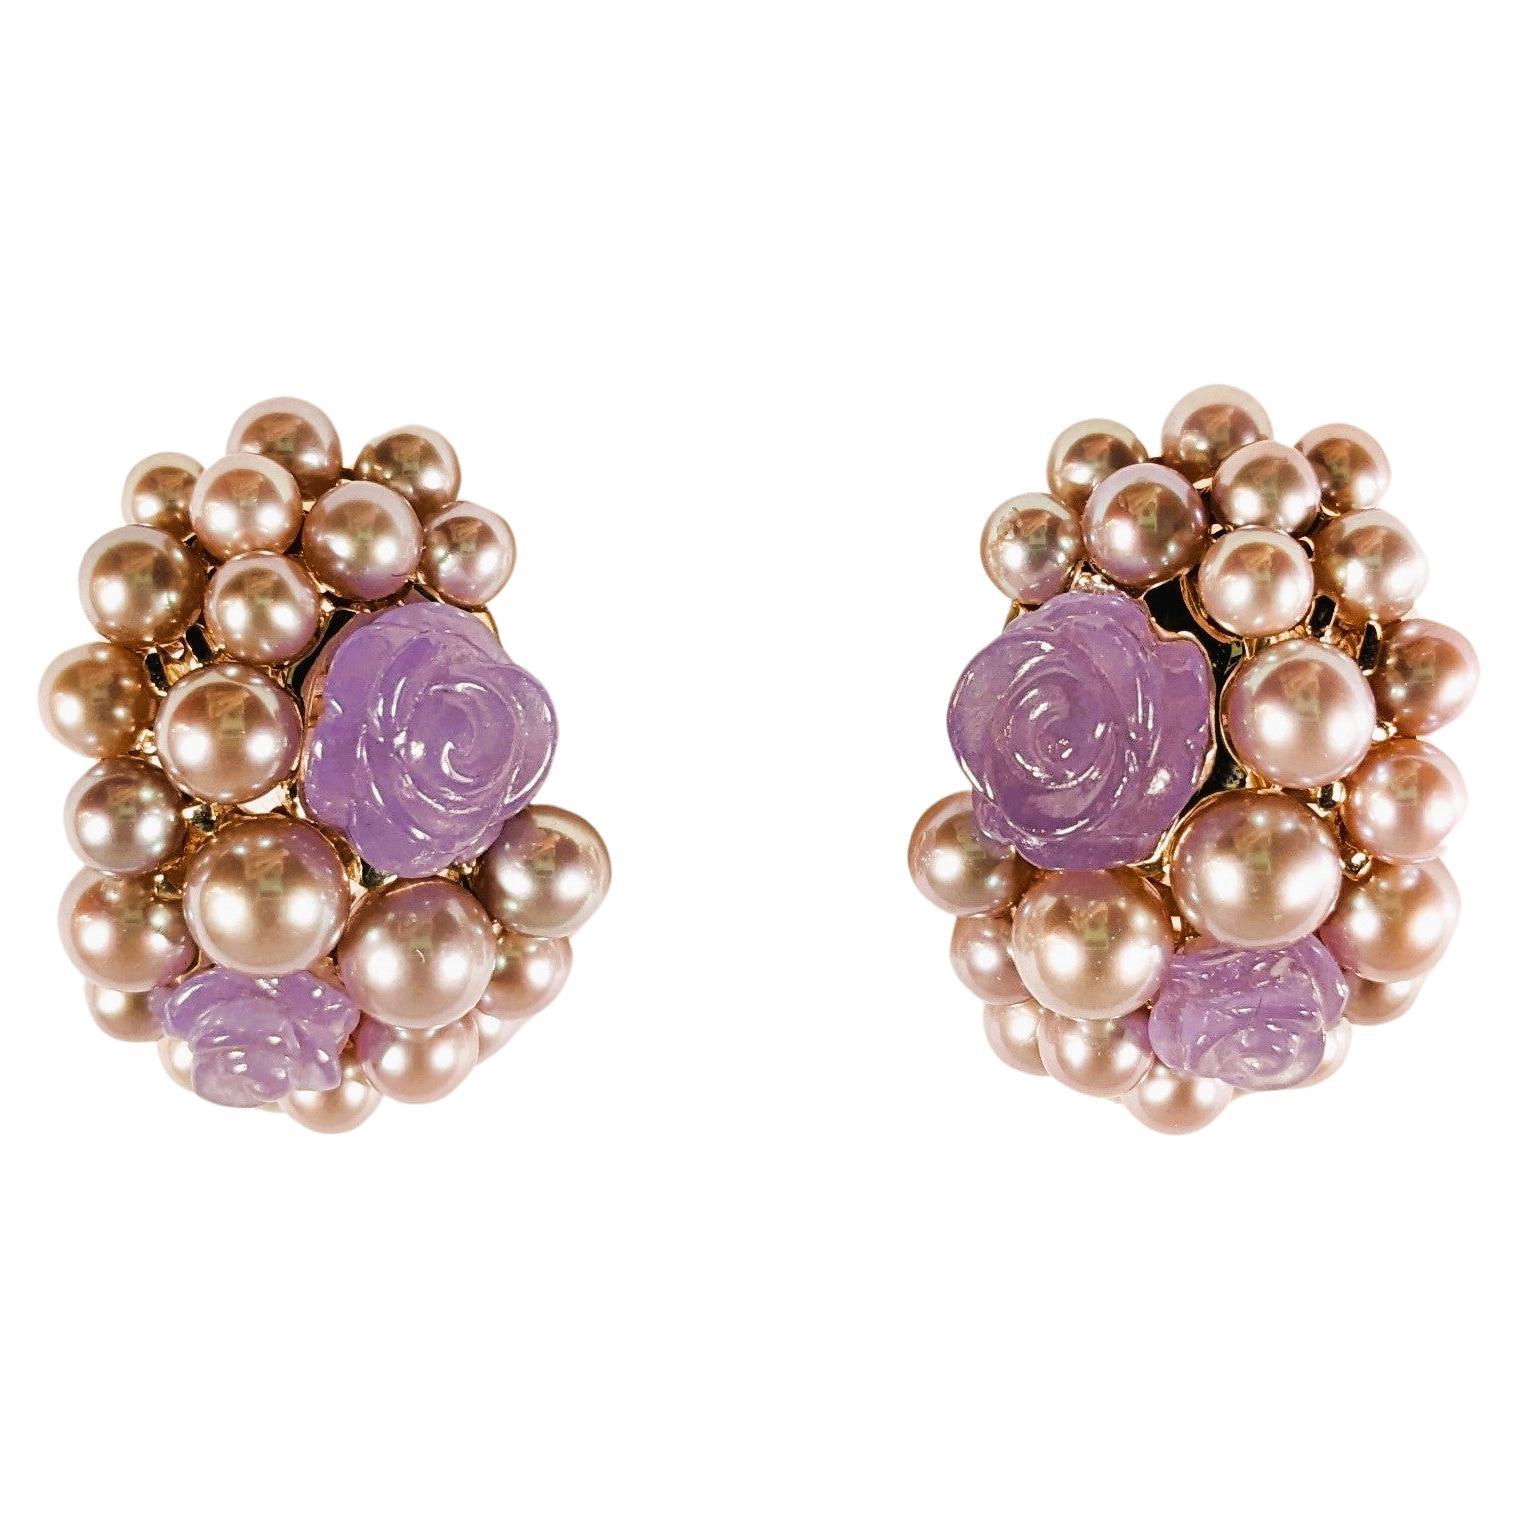 Vintage Mimi Milano 18K Rose Gold Earrings  Agate Flowers, Cultivated Pearls For Sale